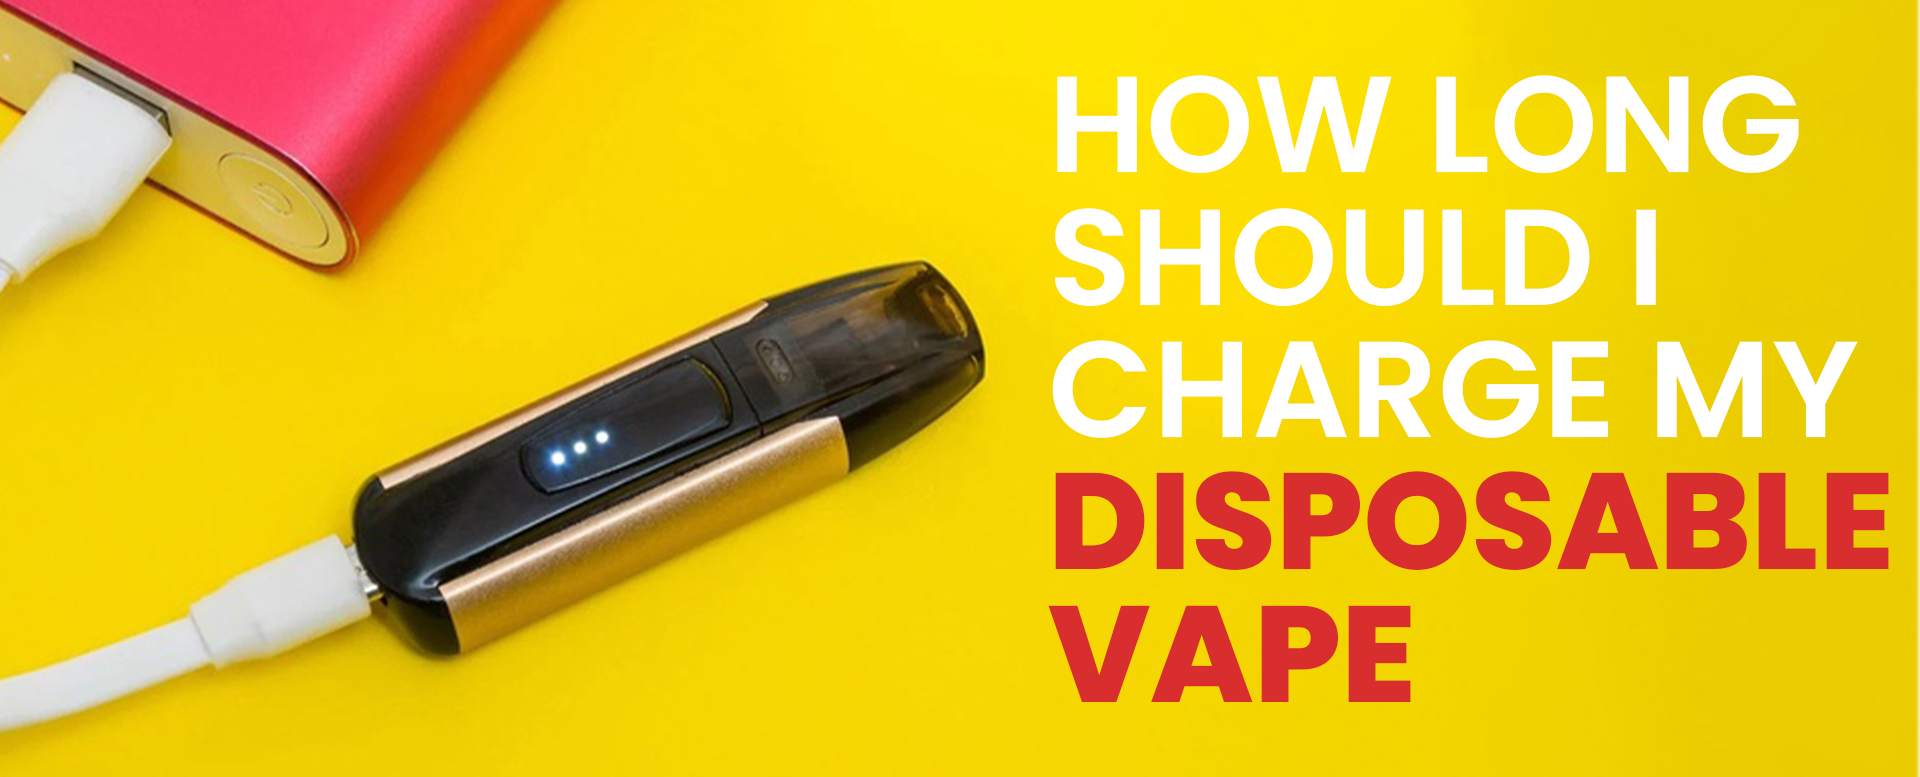 How Long Should I Charge My Disposable Vape